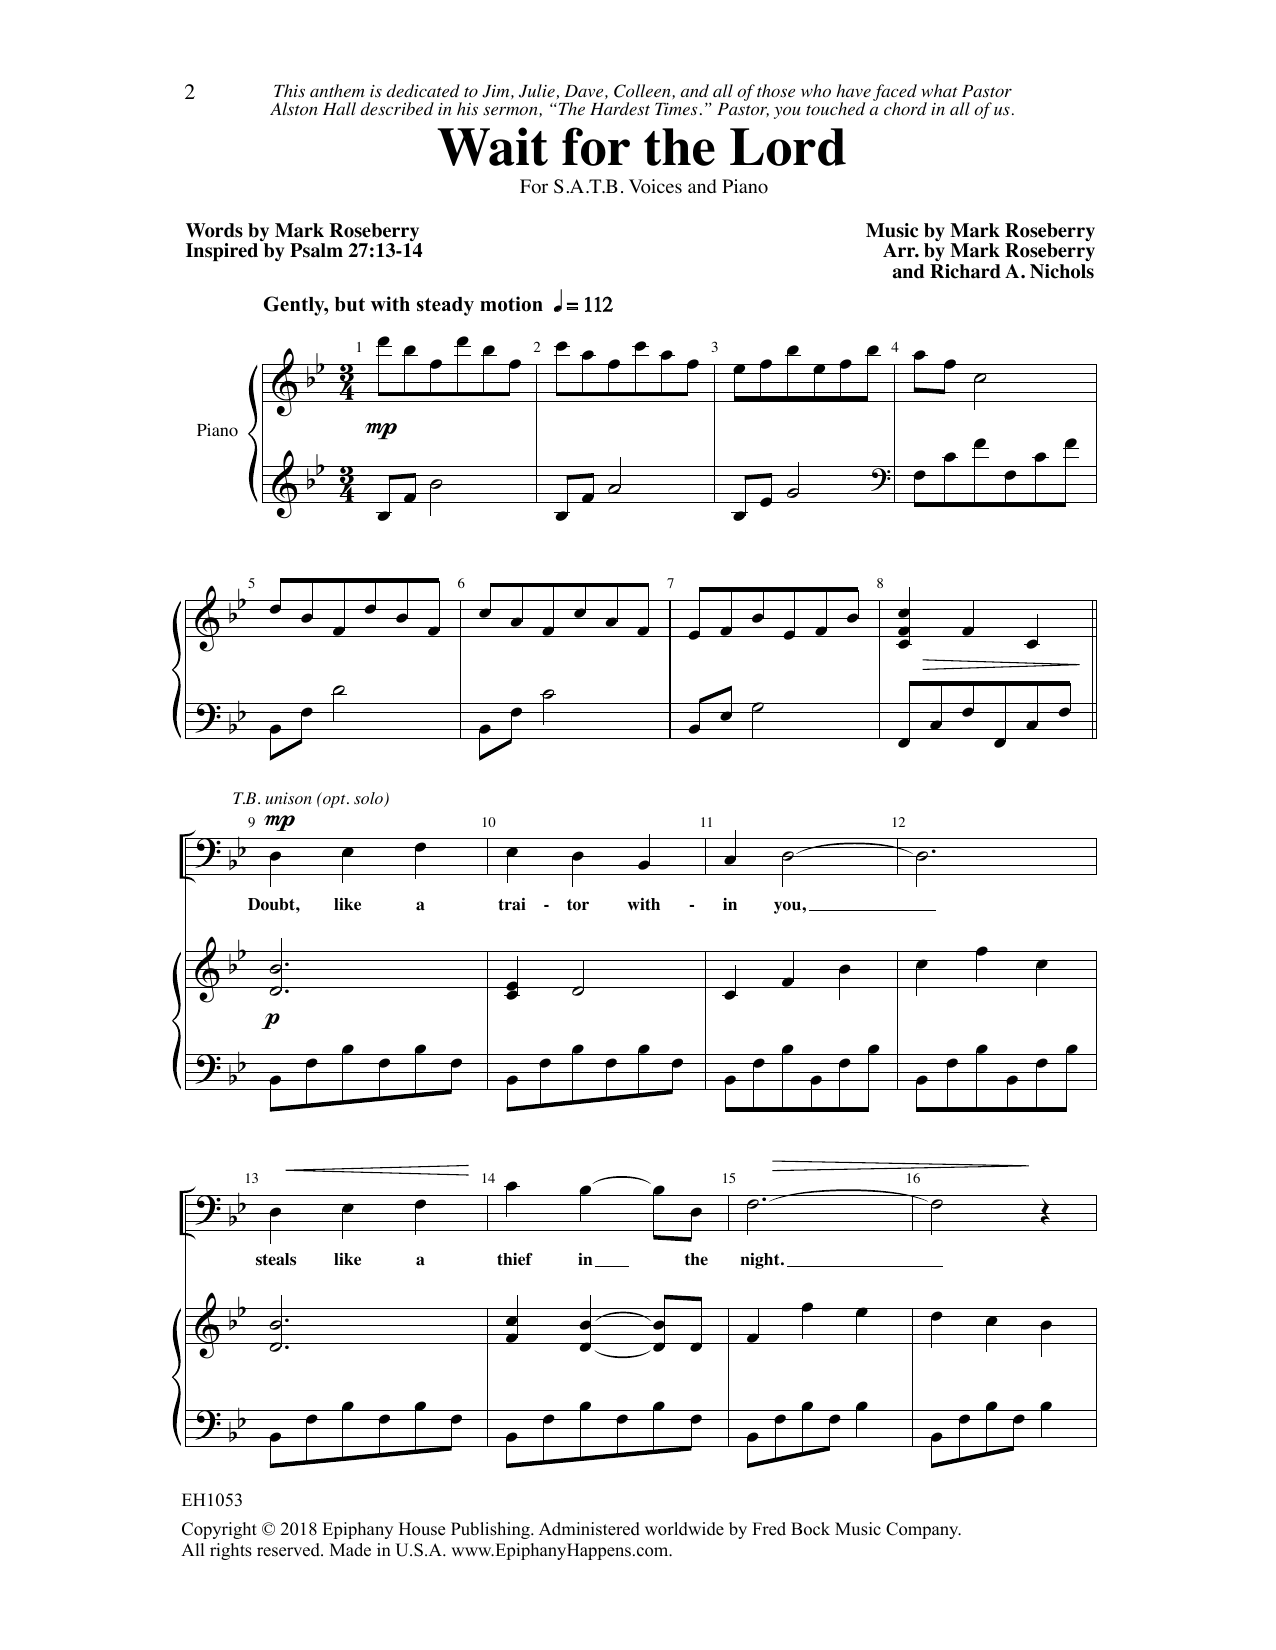 Download Mark Roseberry Wait for the Lord Sheet Music